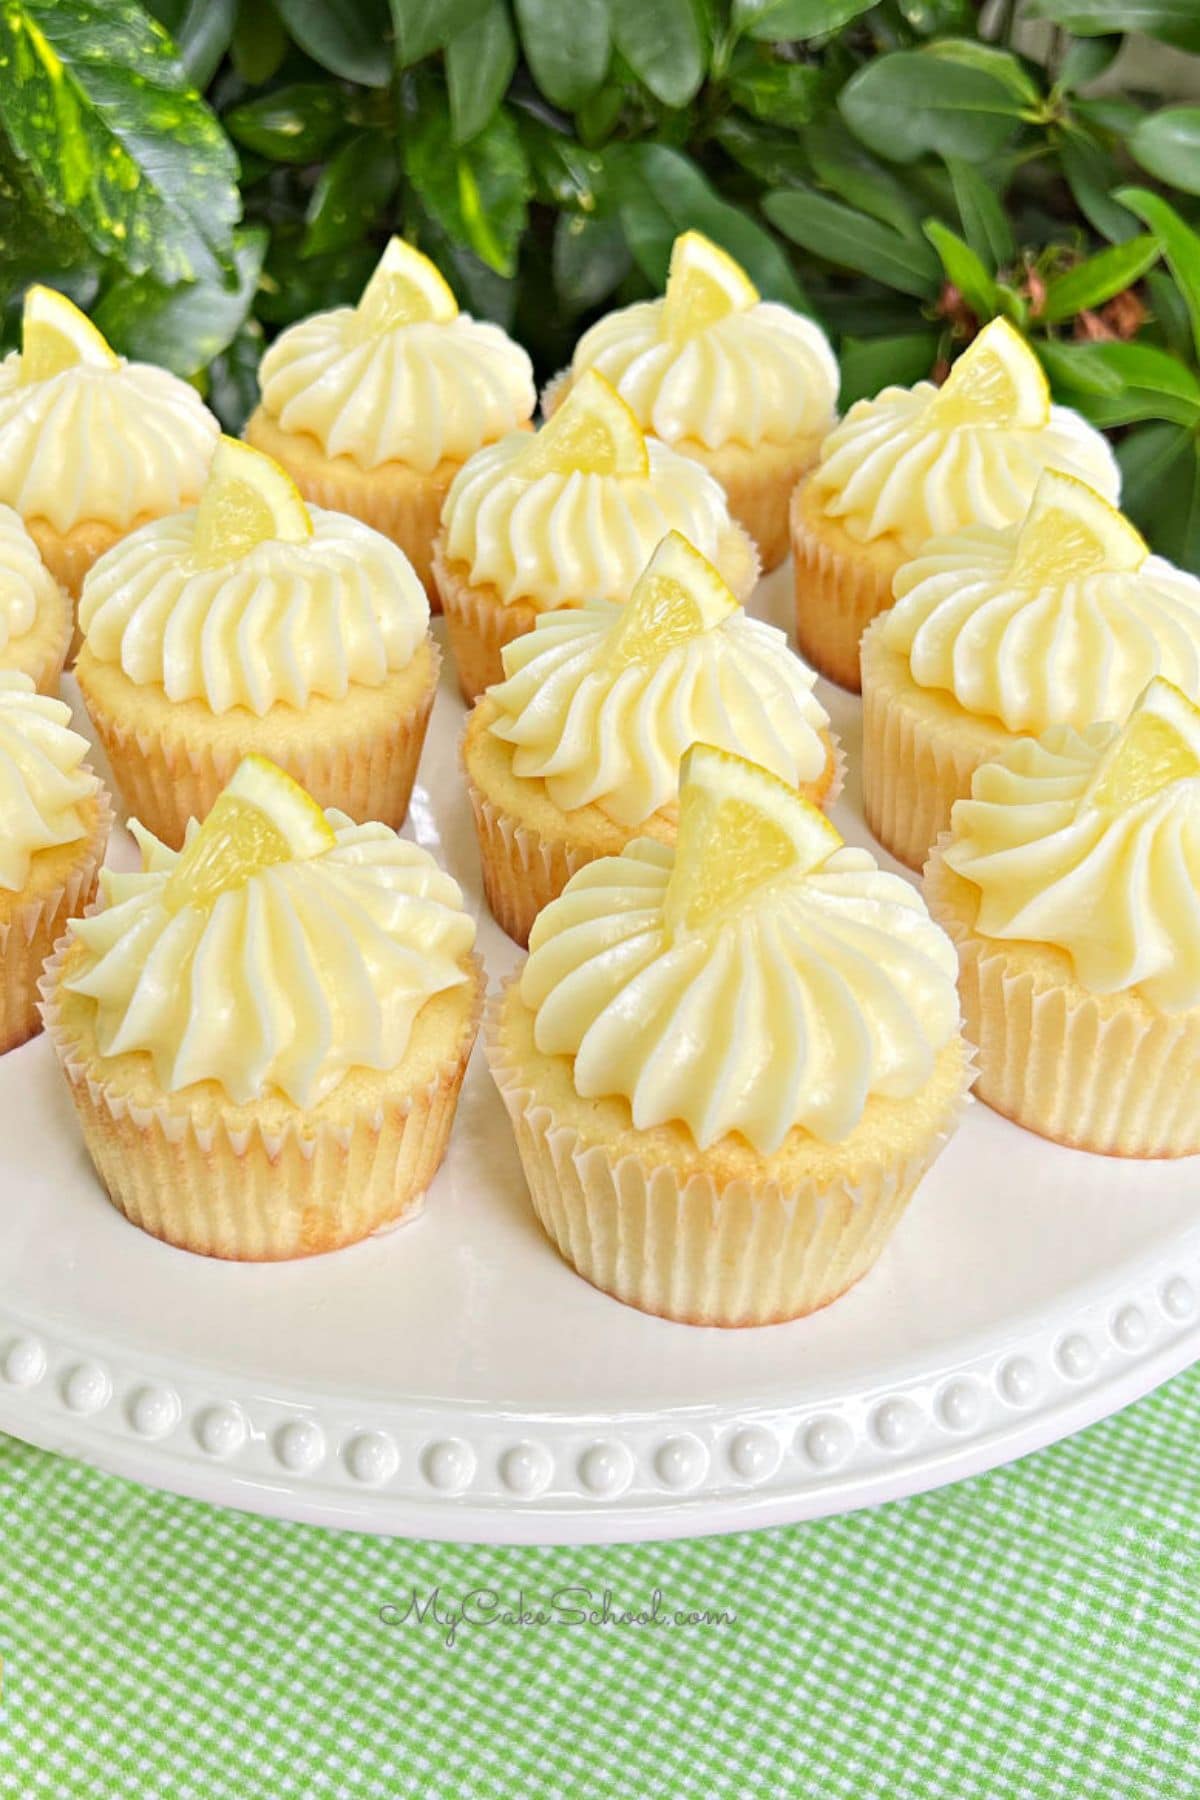 Lemon cupcakes frosted with lemon cream cheese frosting, and topped with small lemon slices, on a white cake pedestal.